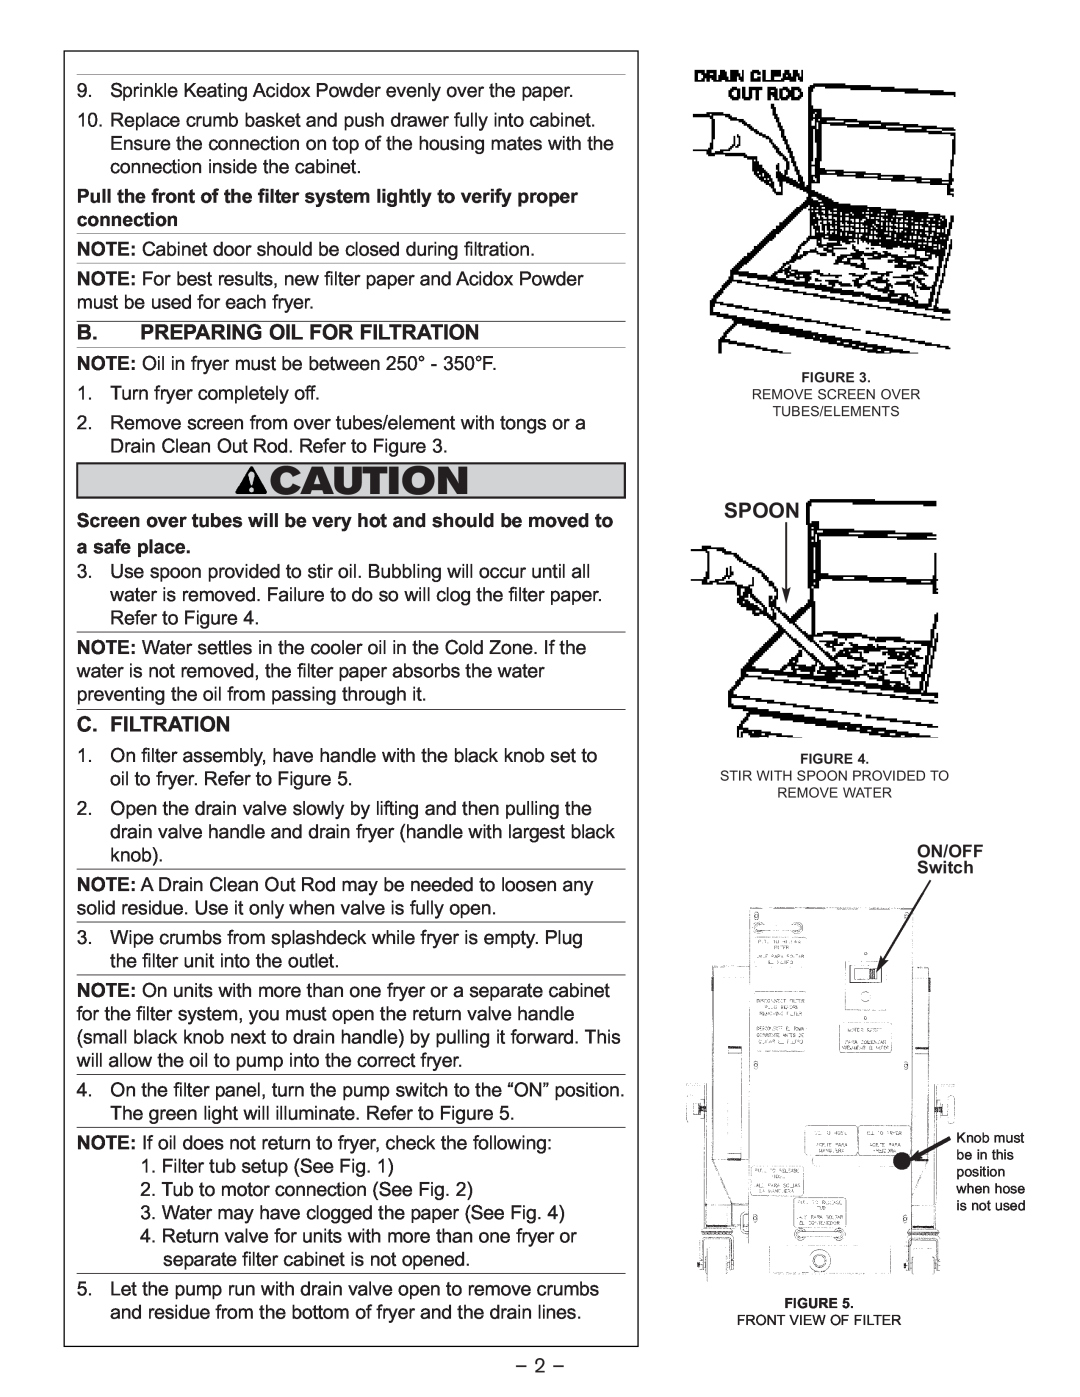 Keating Of Chicago 1-800 owner manual C. Filtration, Spoon 